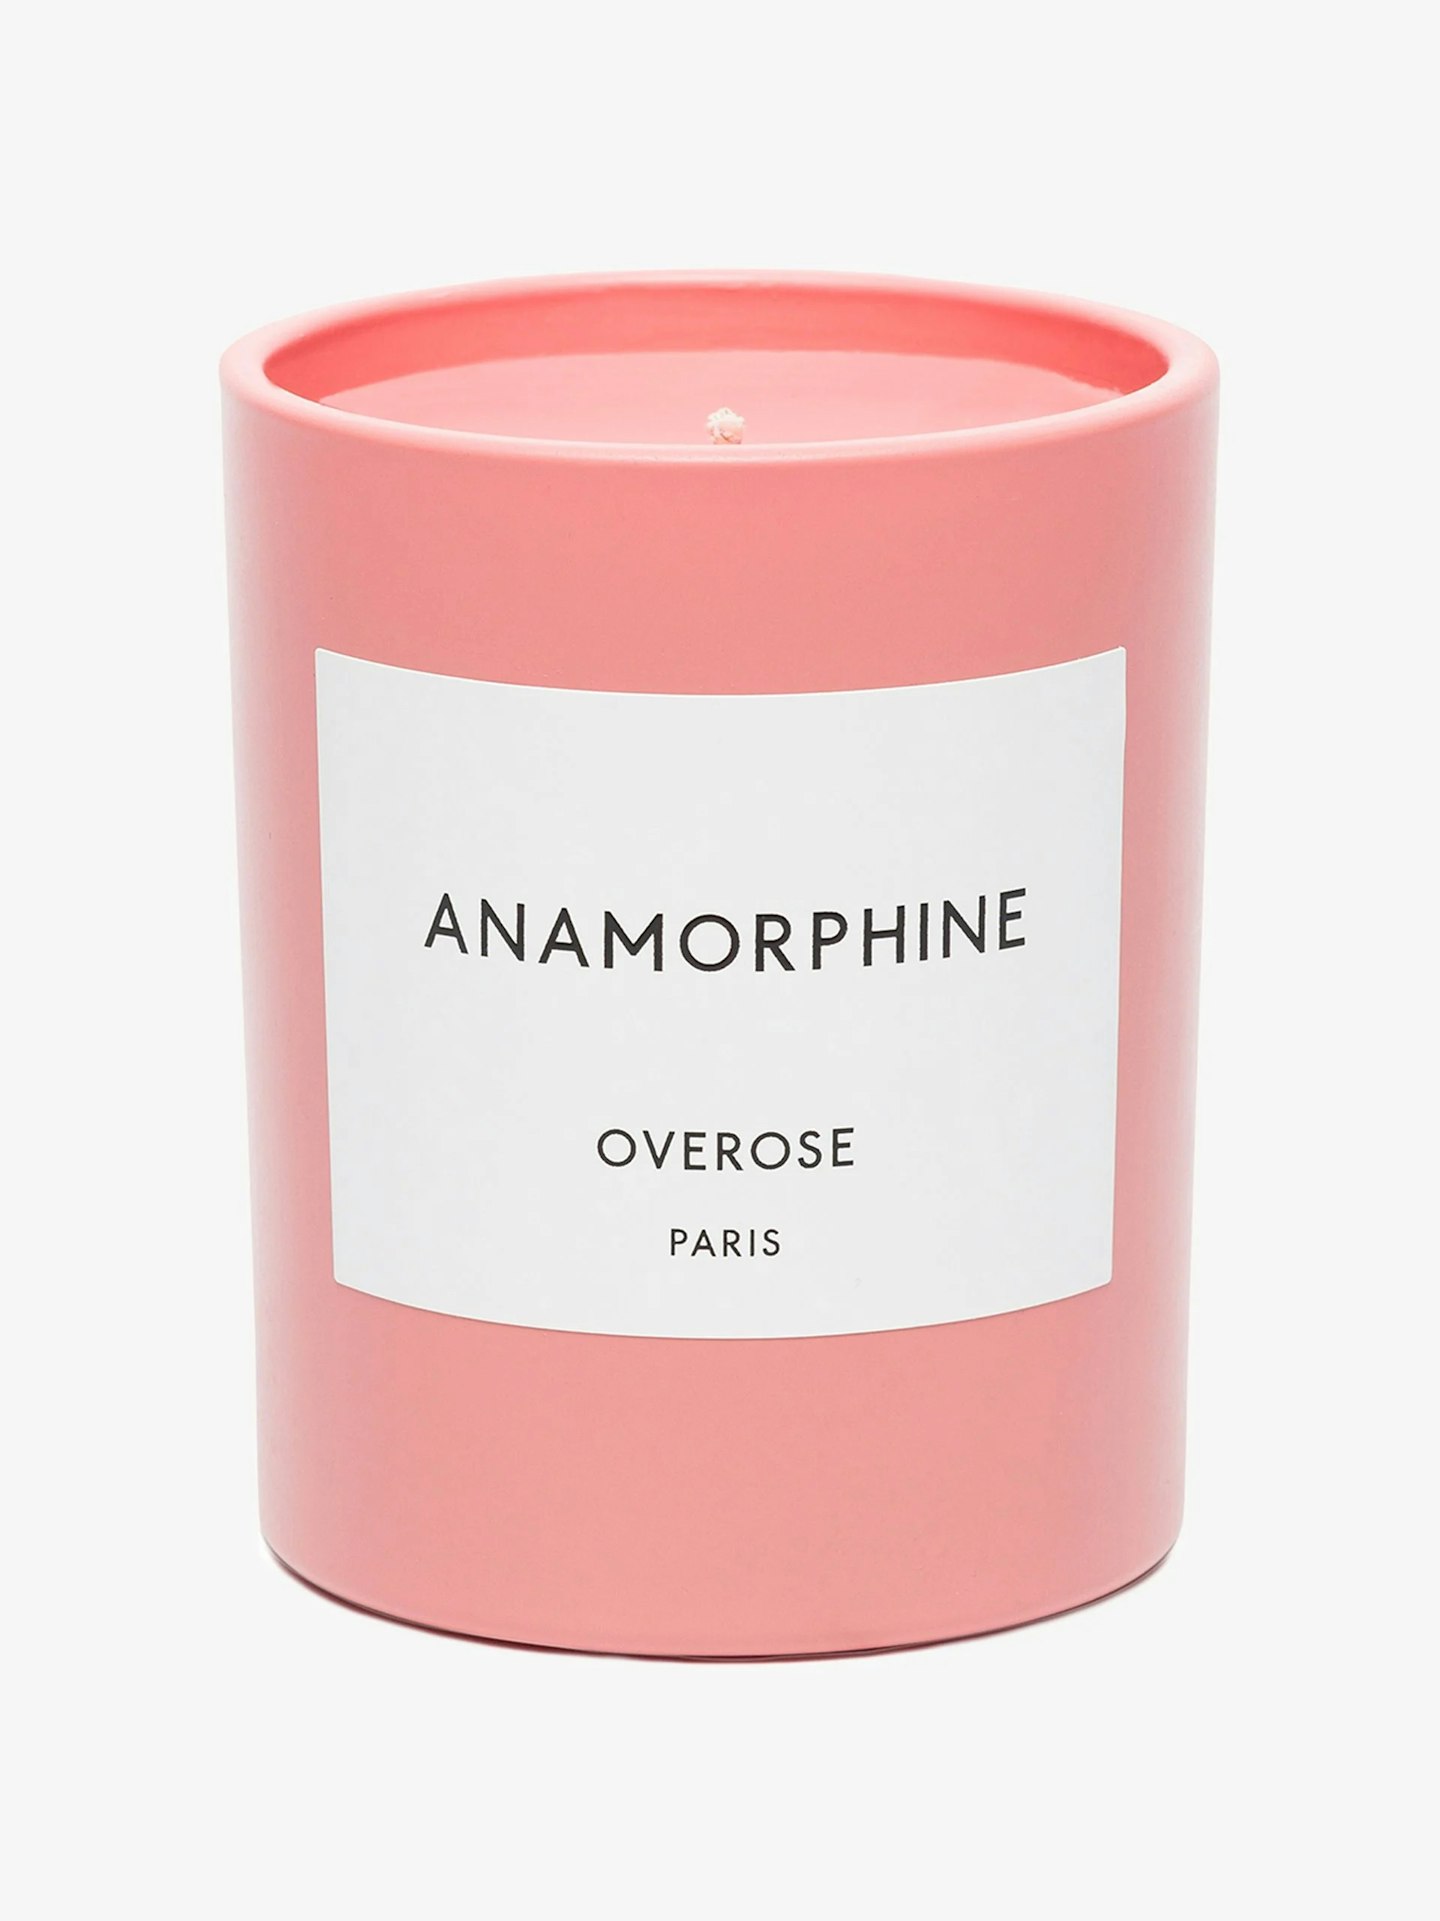 lunchtime shop Monday - Overose Pink Anamorphine Candle £45